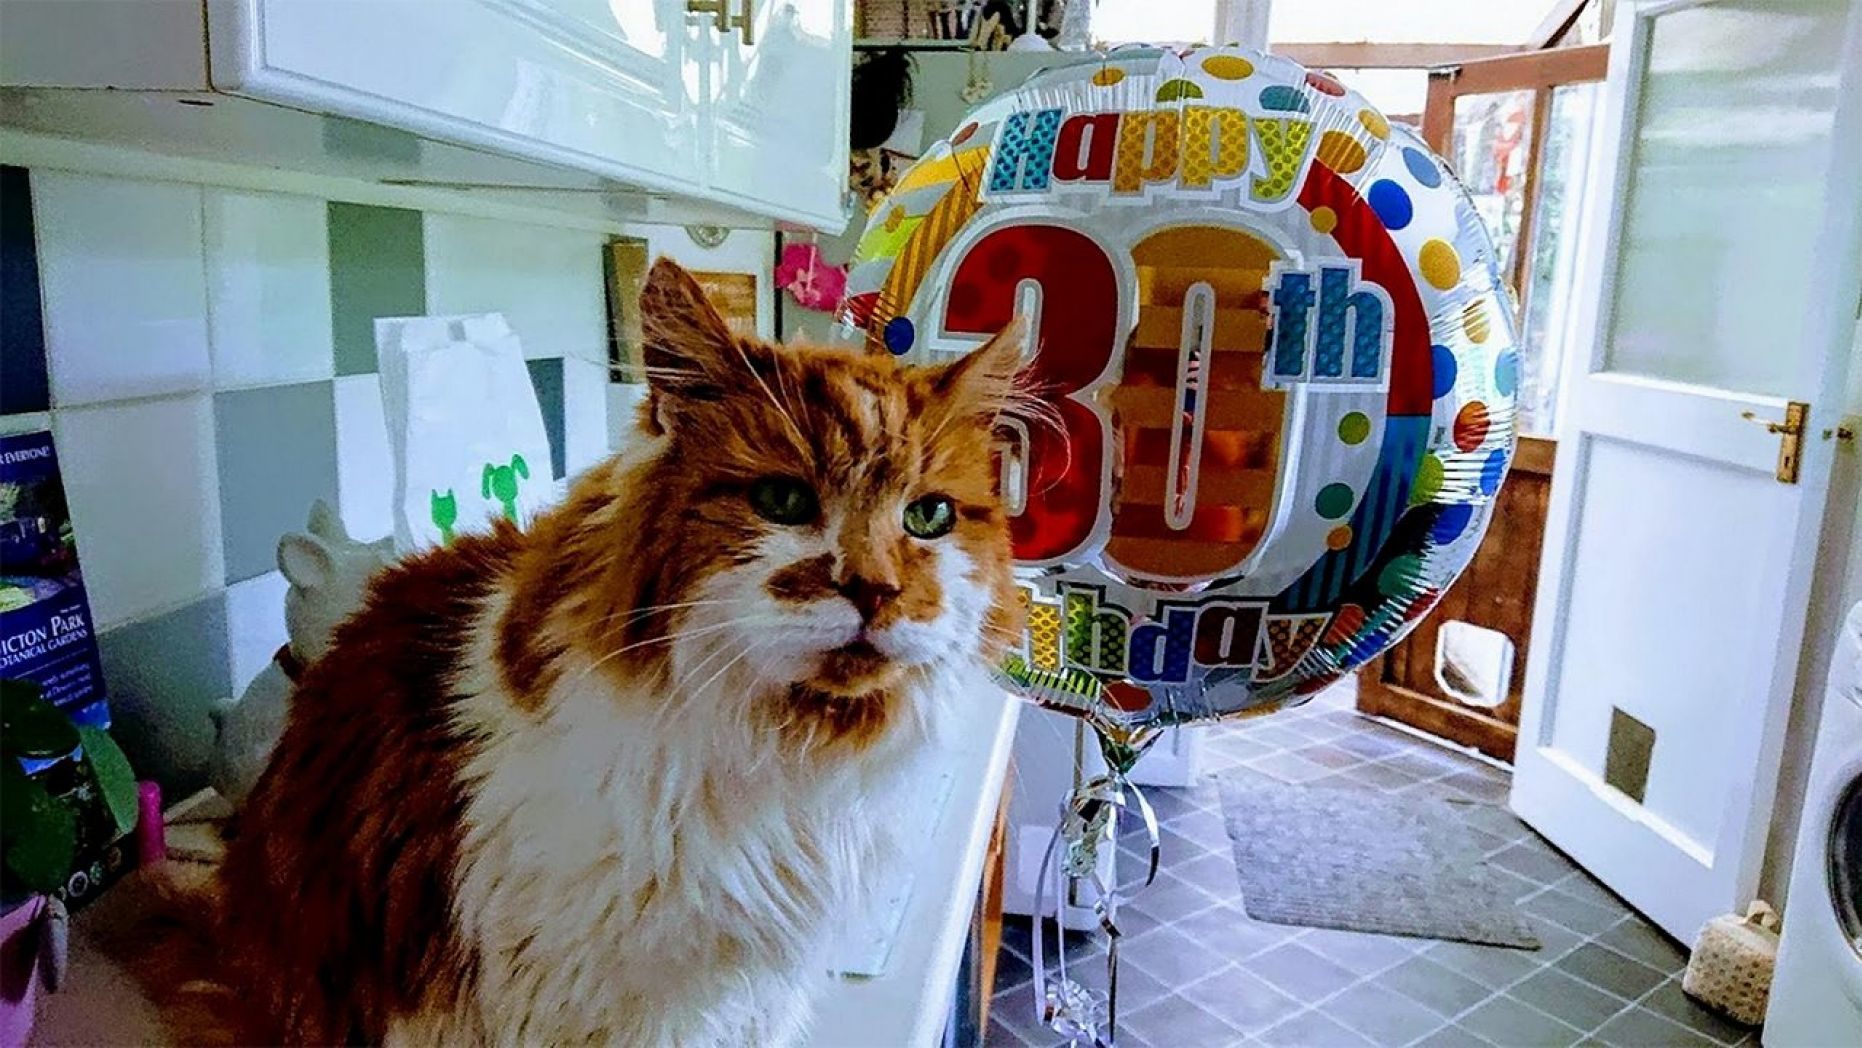 Rubble The Cat Celebrates 30Th Birthday With Owner Since 1988 - World Of Buzz